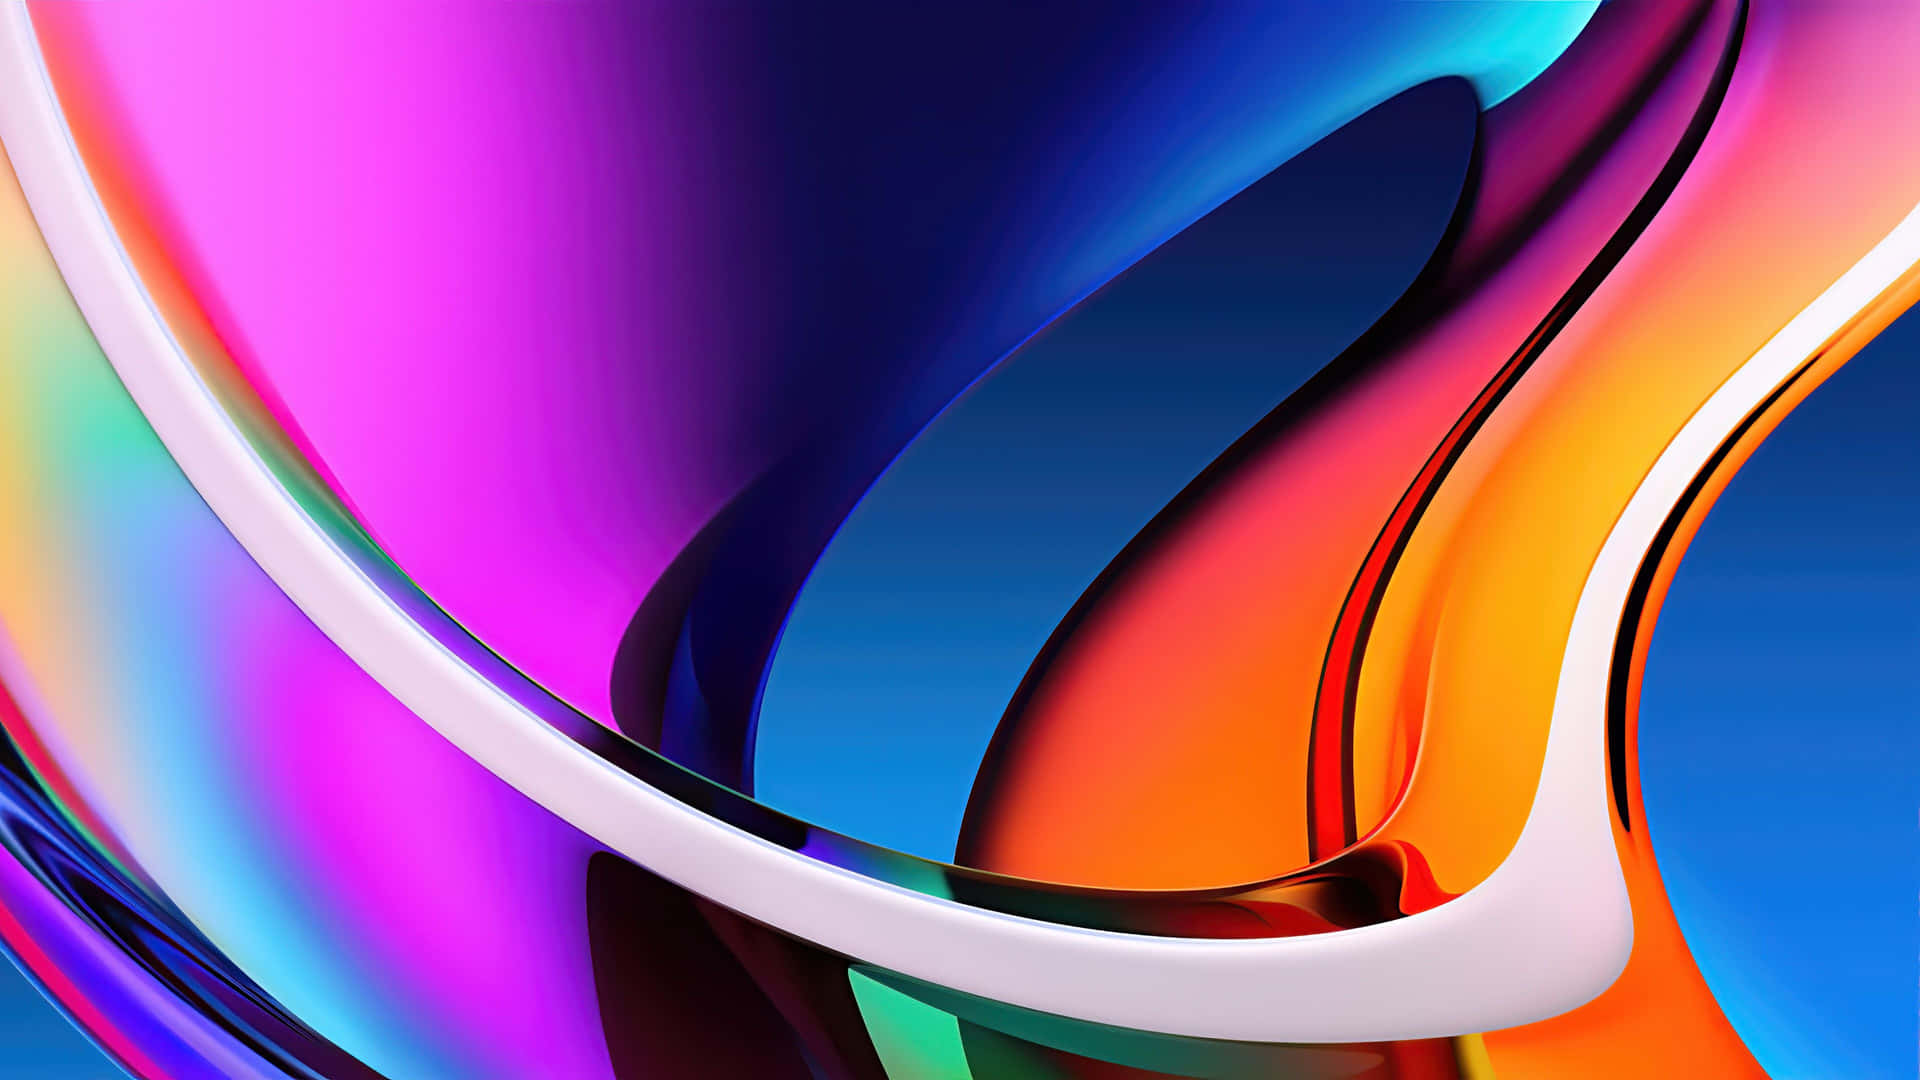 A Colorful Abstract Design Wallpaper